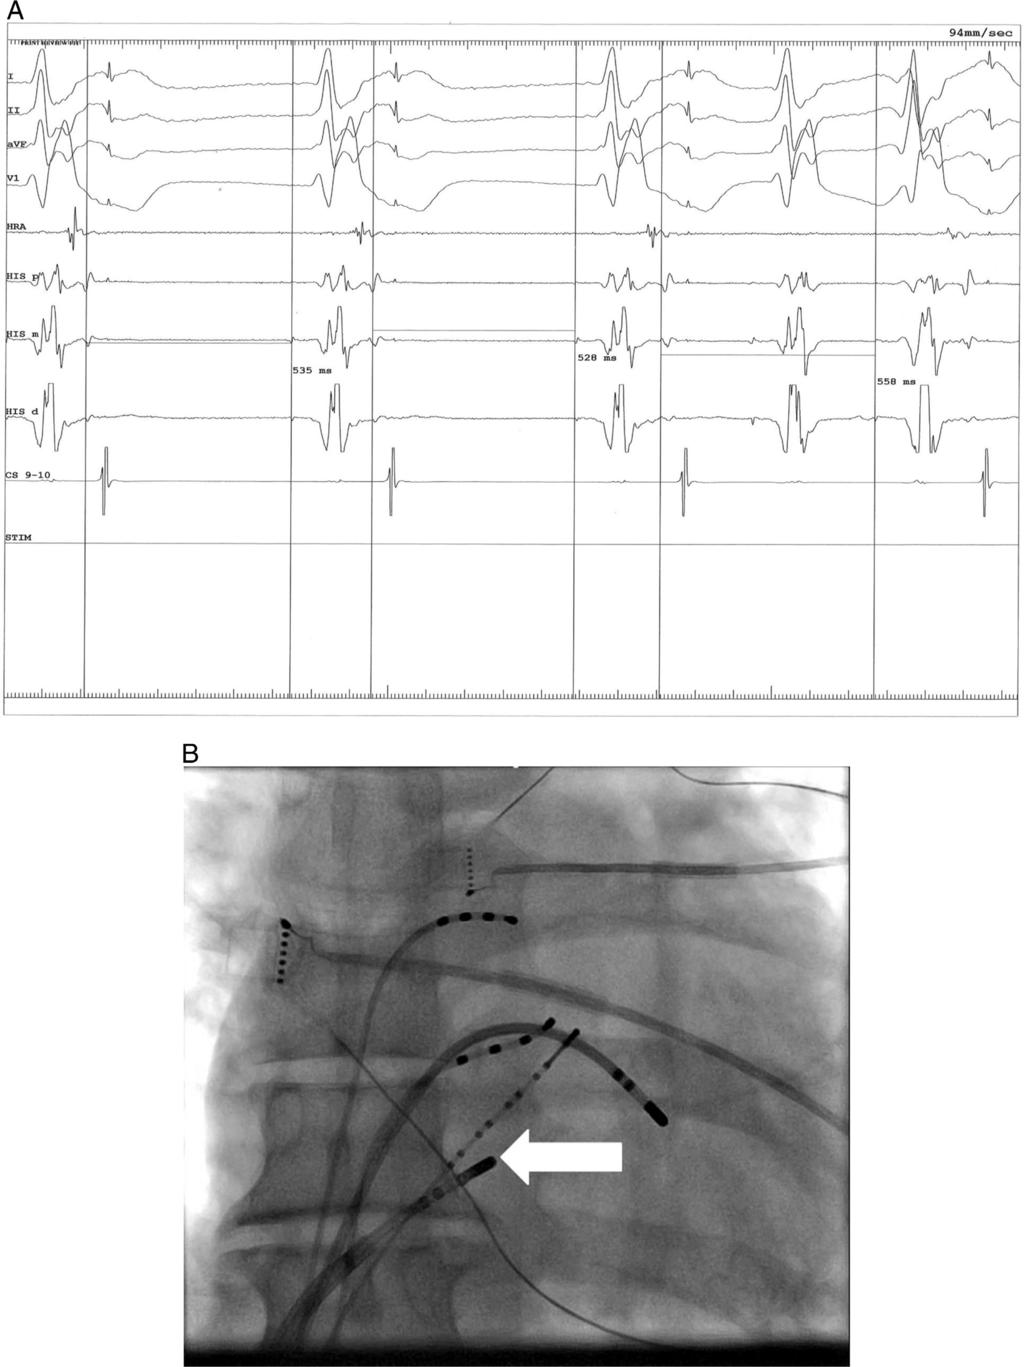 Rivner et al Cryoablation of Dual Atrioventricular Nodal Nonreentrant Tachycardia 67 Figure 3 A: Spontaneously observed intracardiac electrograms during electrophysiology study demonstrating